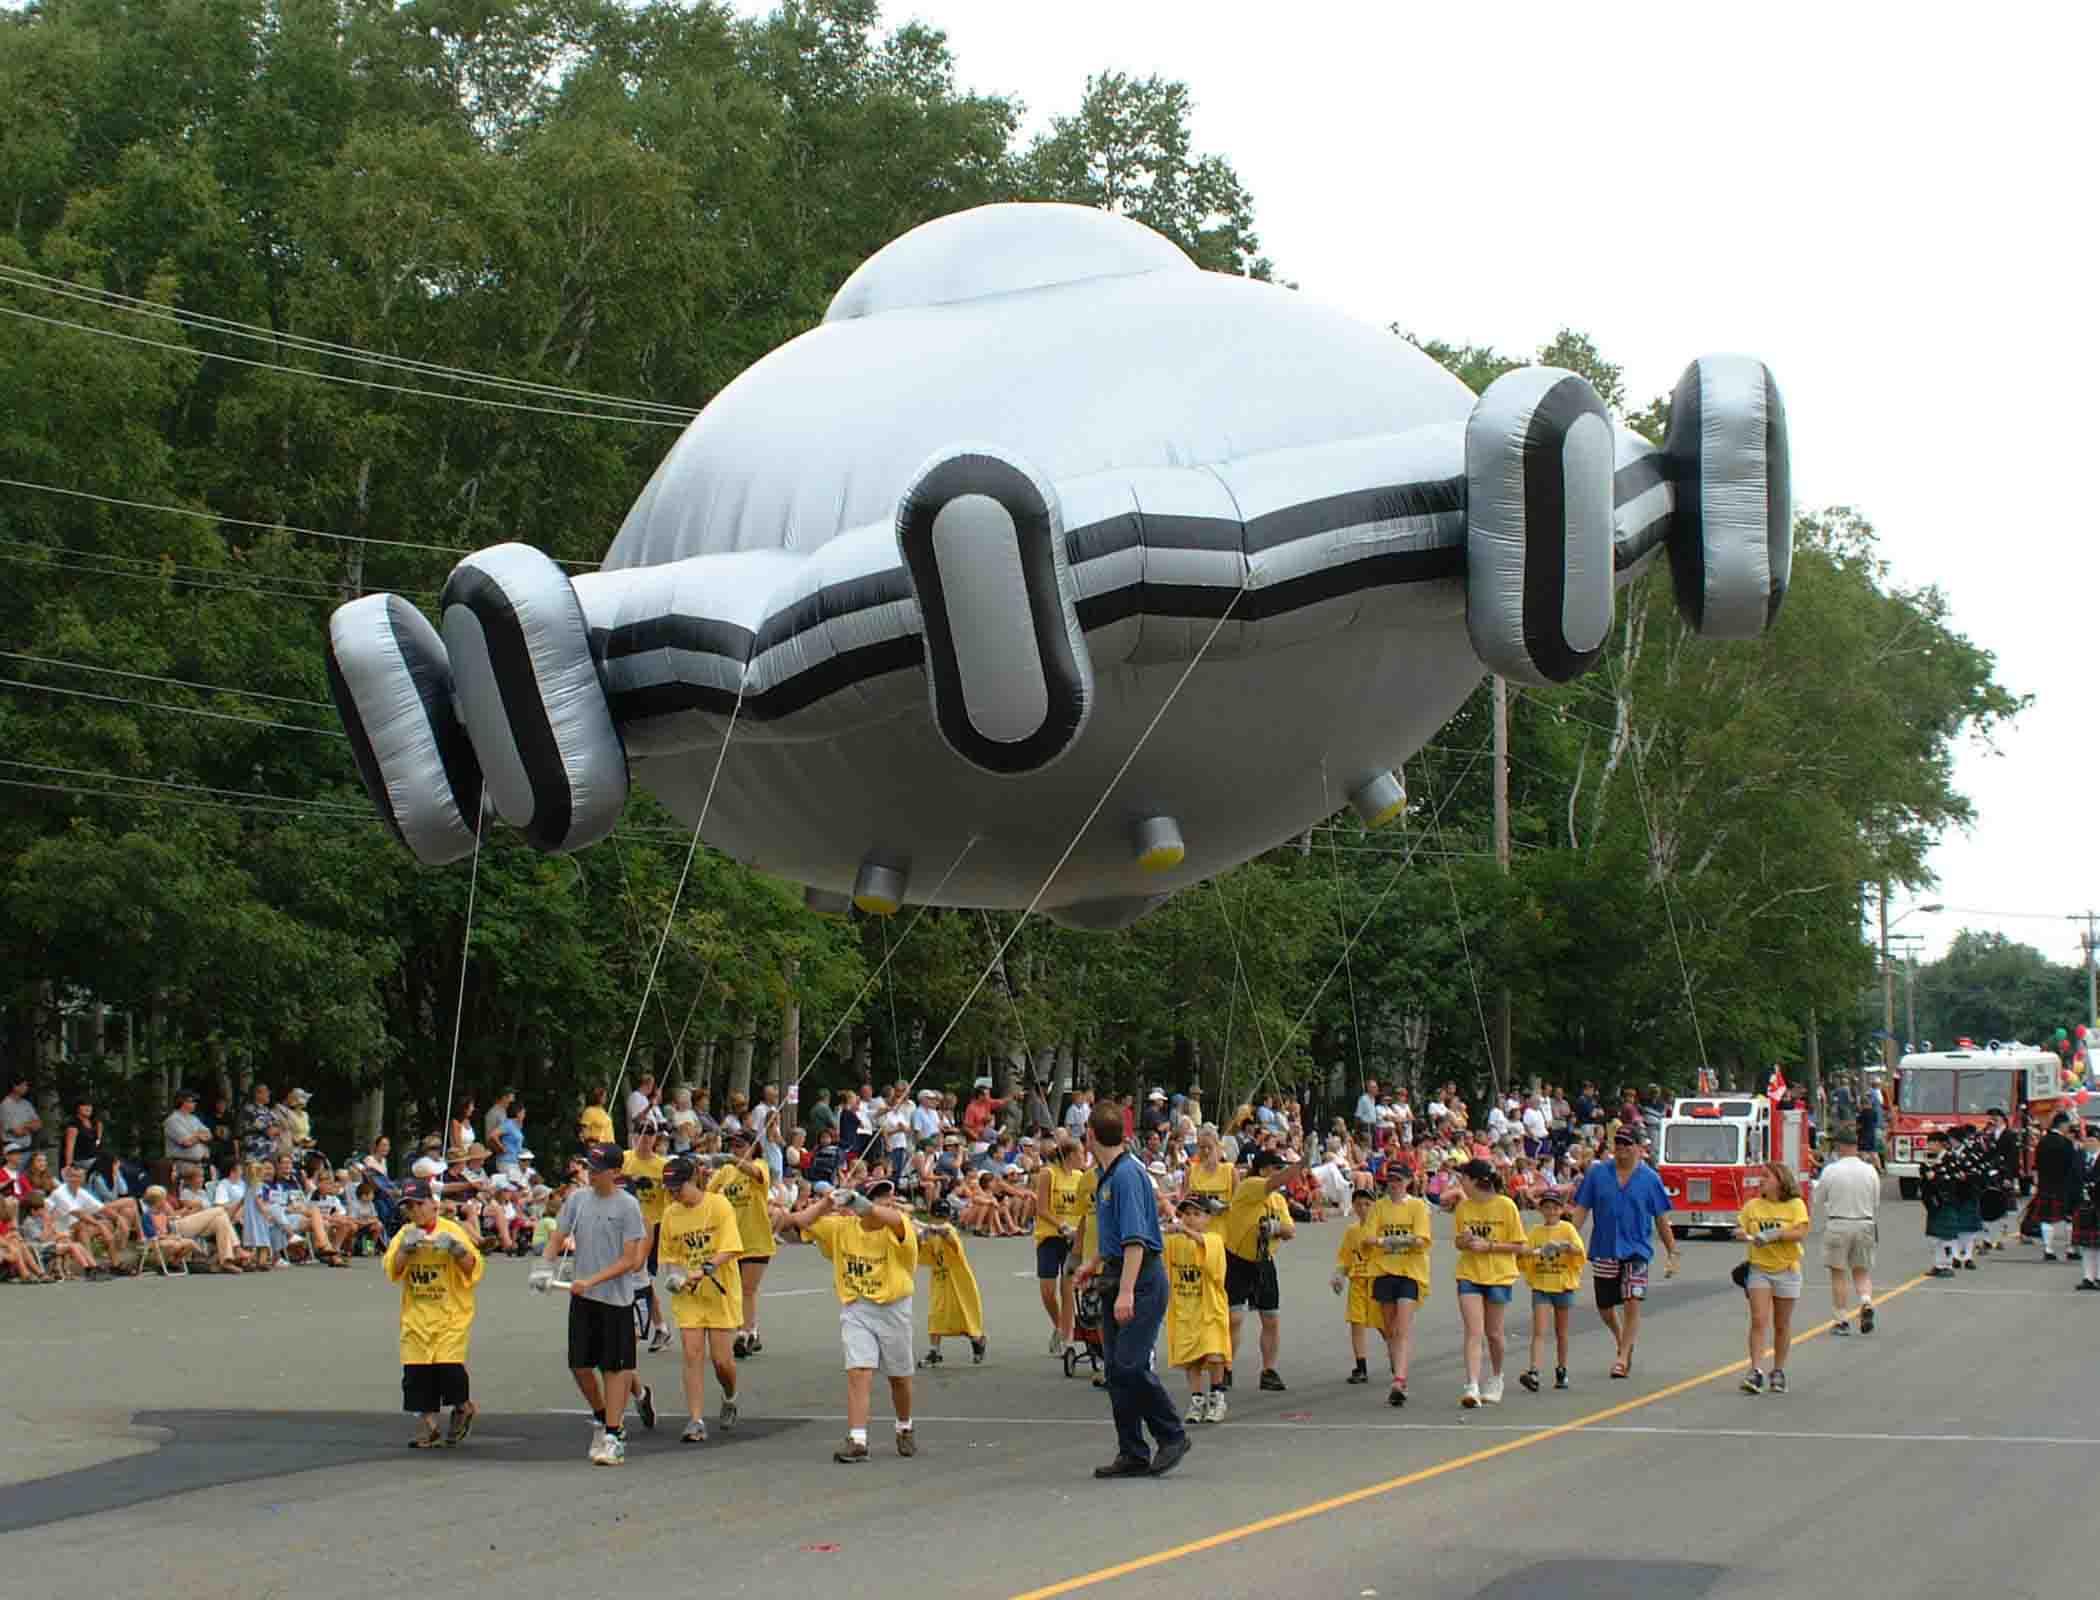 There's a real UFO festival in Roswell, NM because of course there is